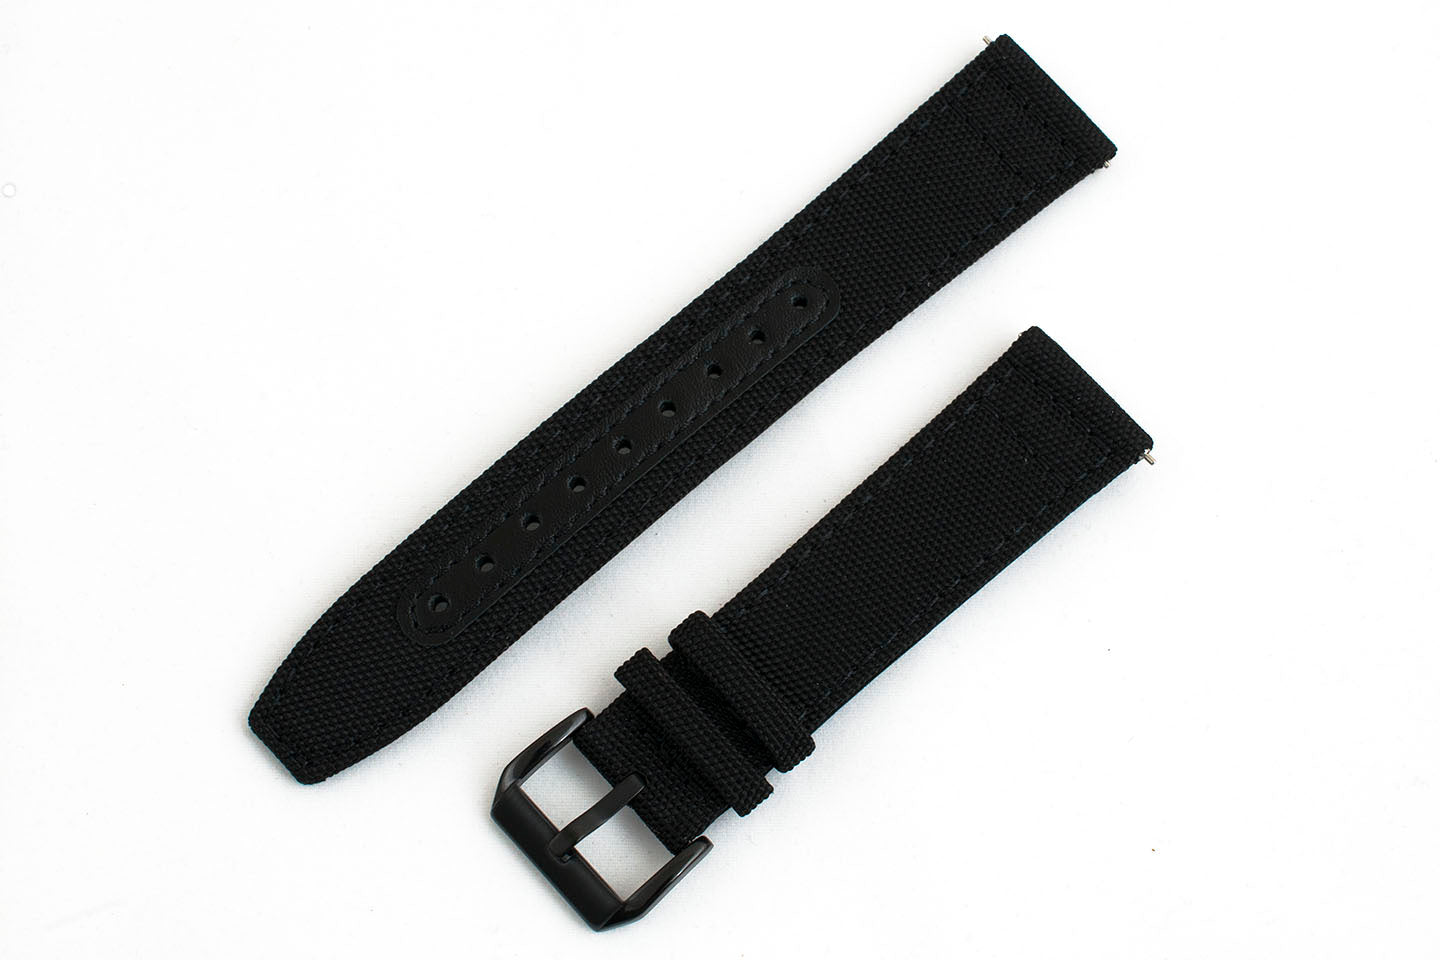 Premium Sailcloth quick release watch strap band replacement 19mm, 20mm, 21mm, 22mm black black buckle